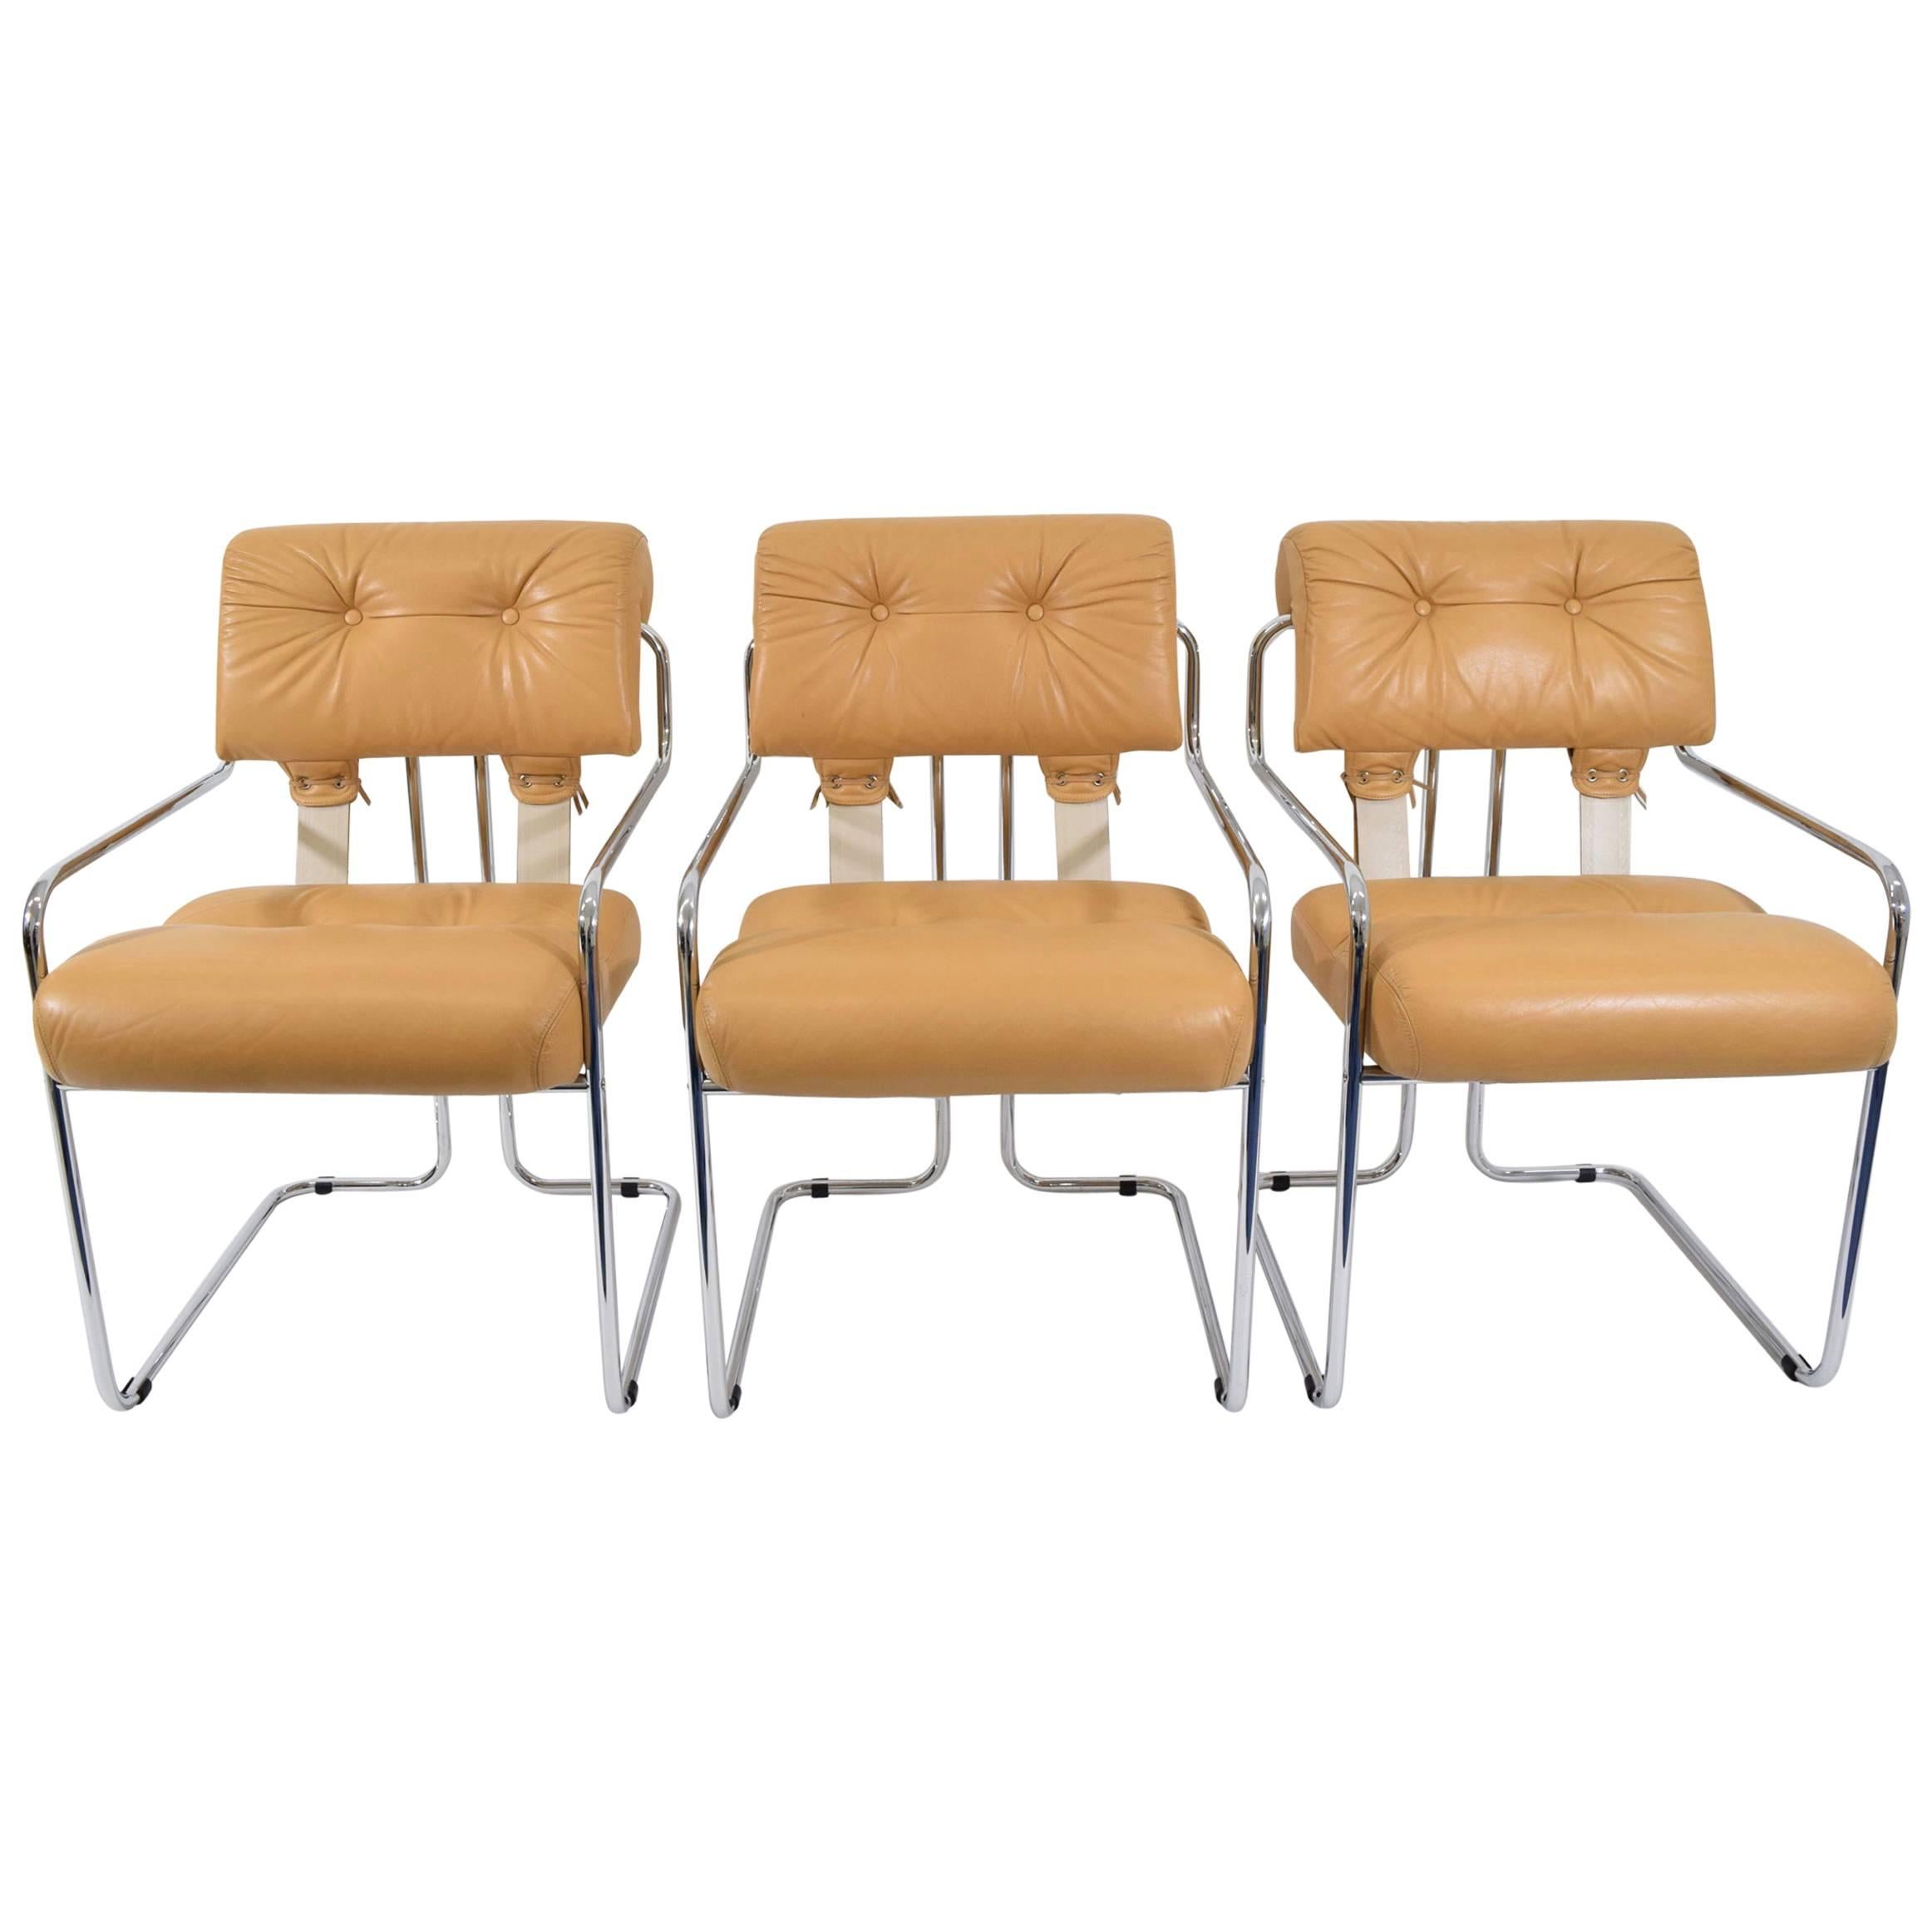 Set of Three "Tucroma" Chairs by Guido Faleschini for Pace